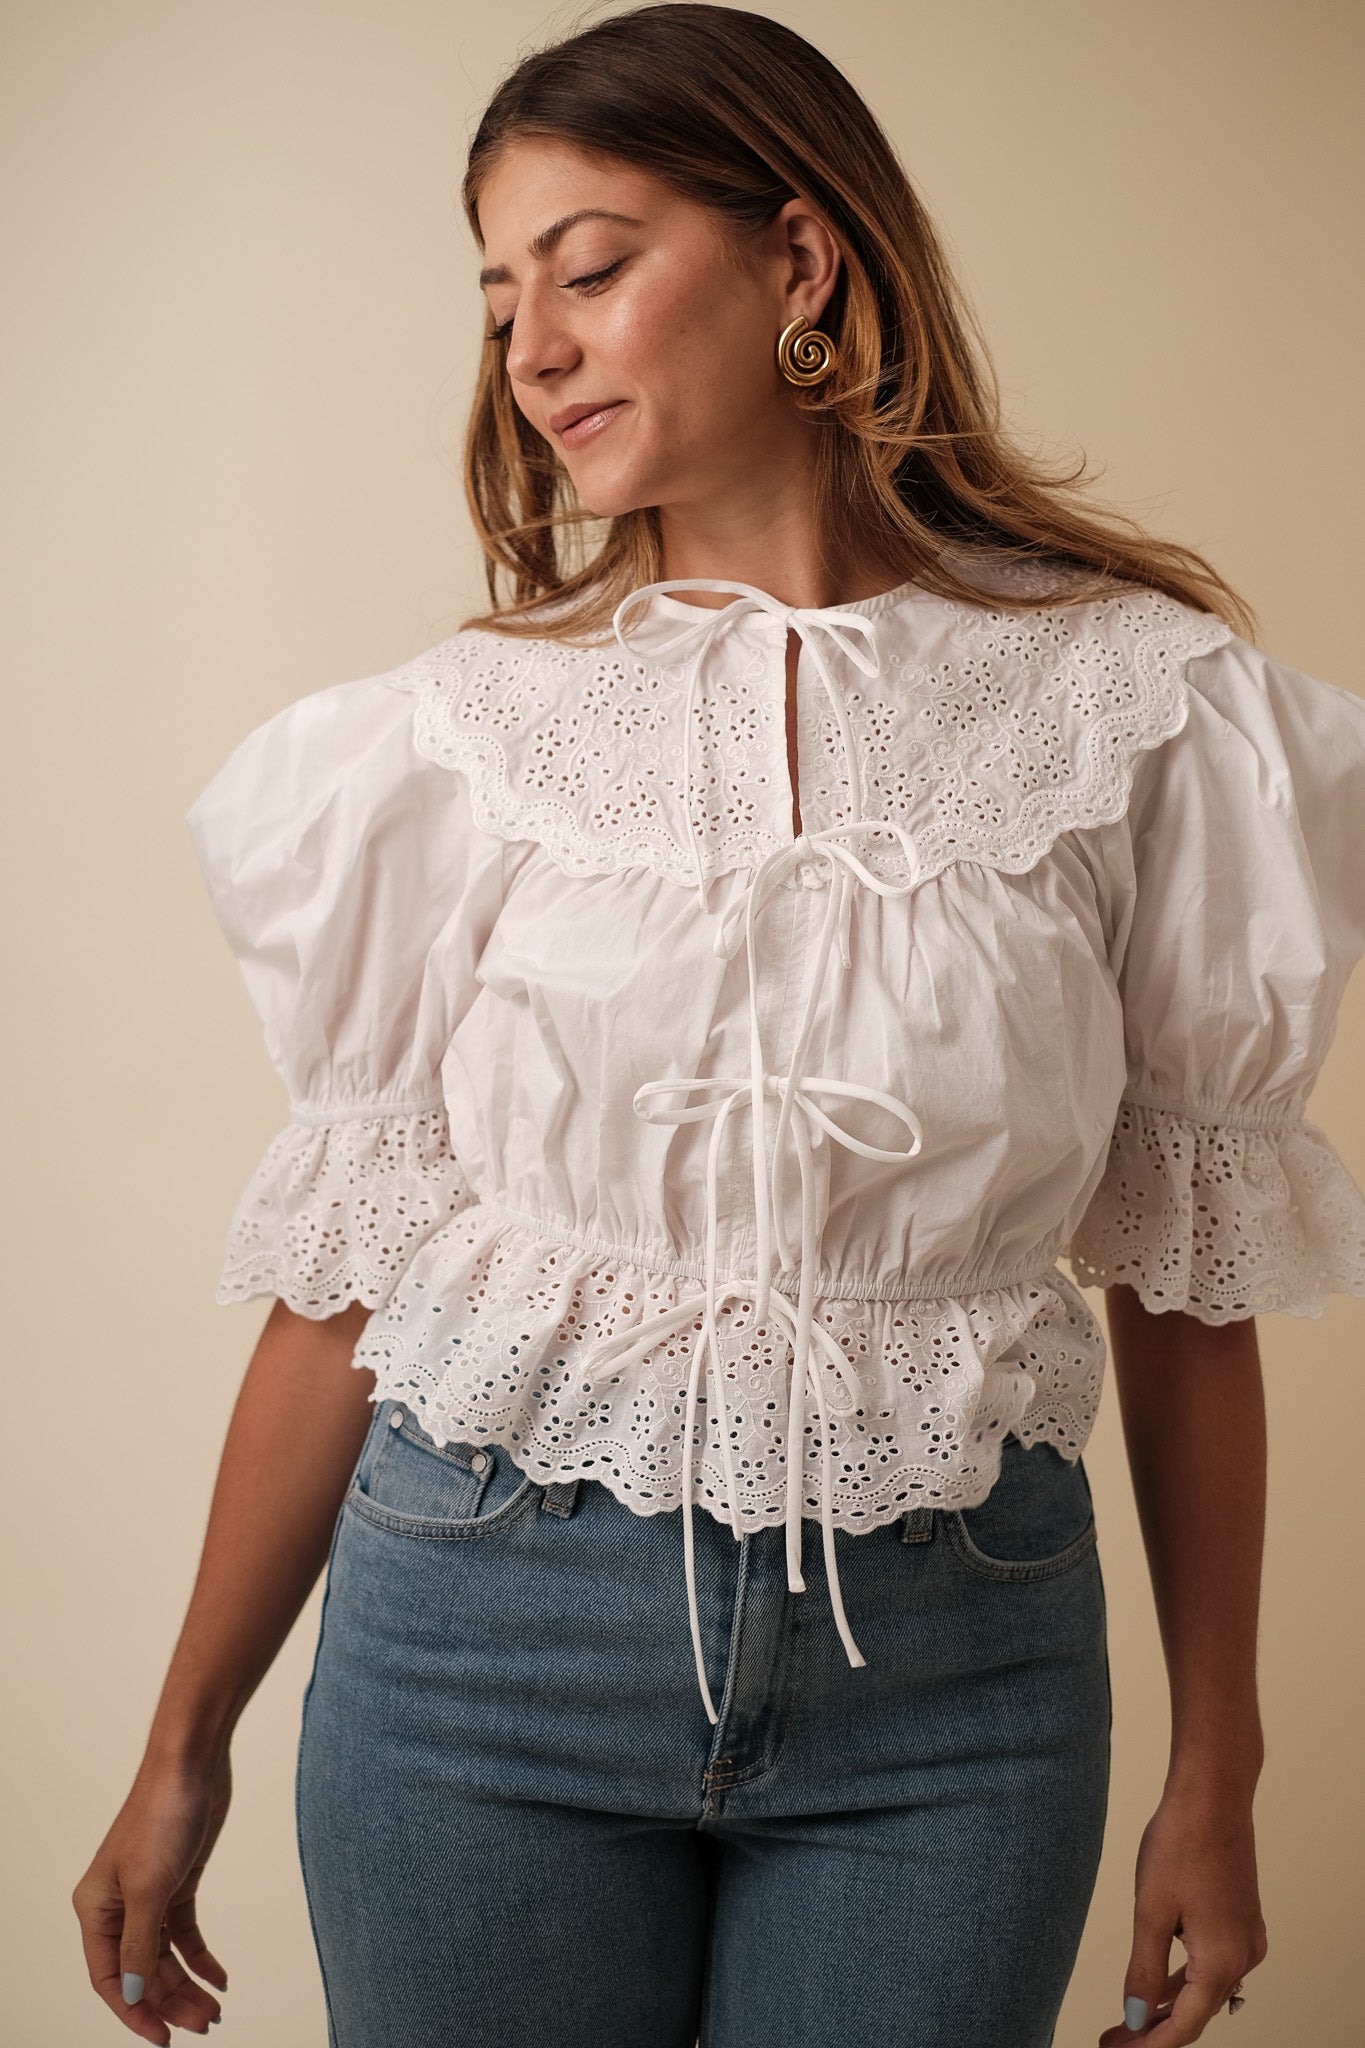 Sofie the Label Melody White Eyelet Peasant Top